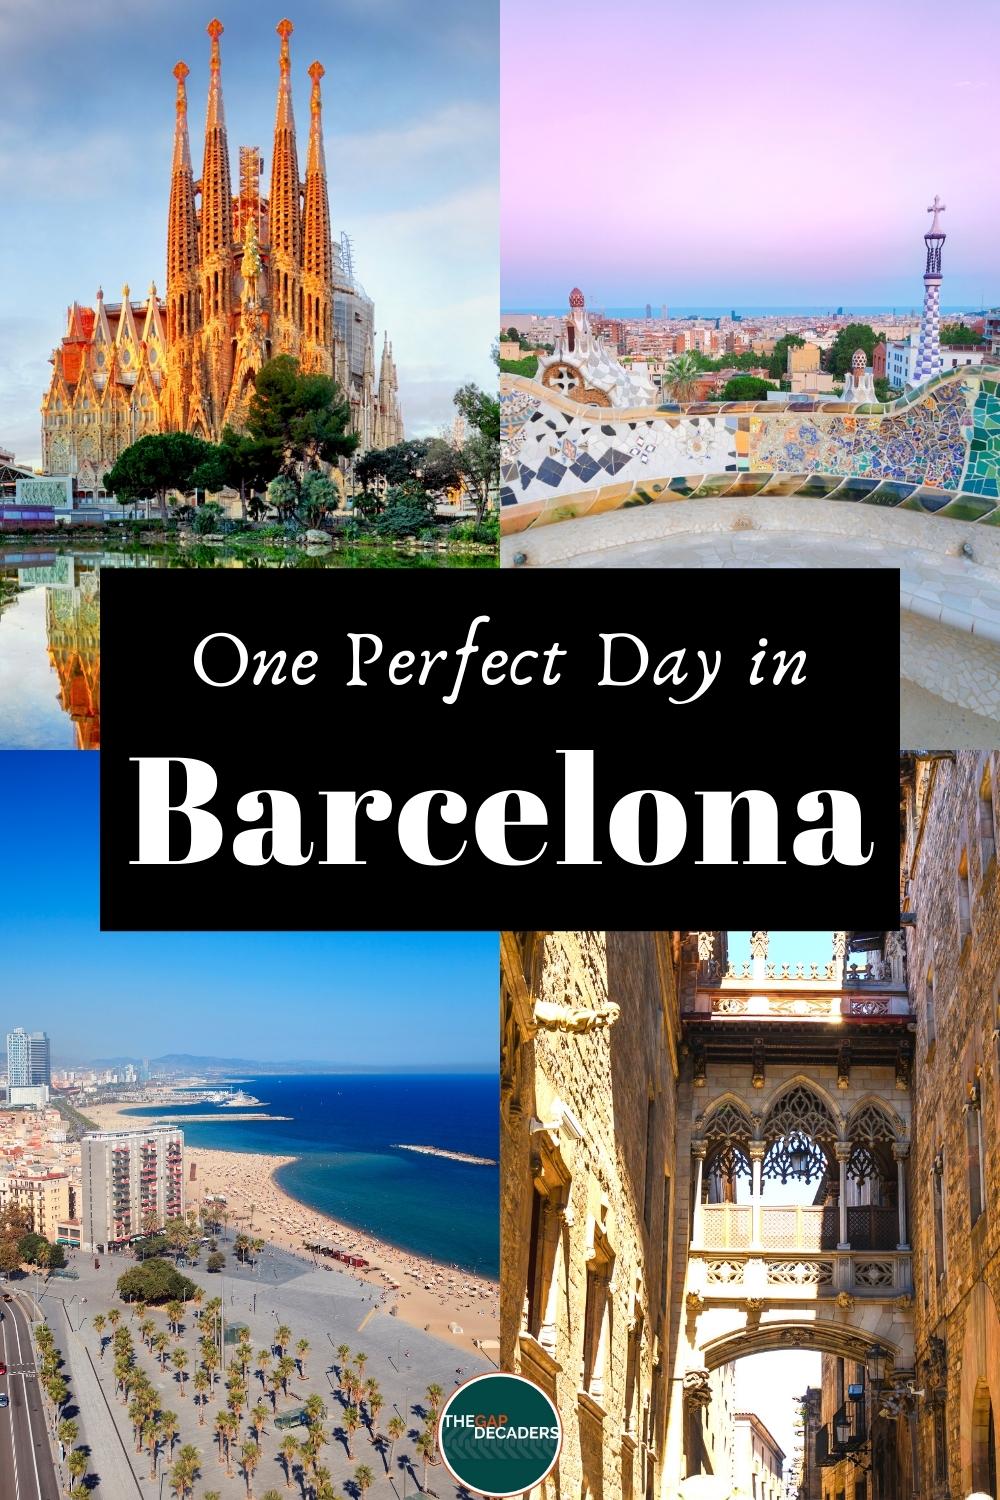 One Day in Barcelona - Itinerary, Map, Tips & Guide | The Gap Decaders